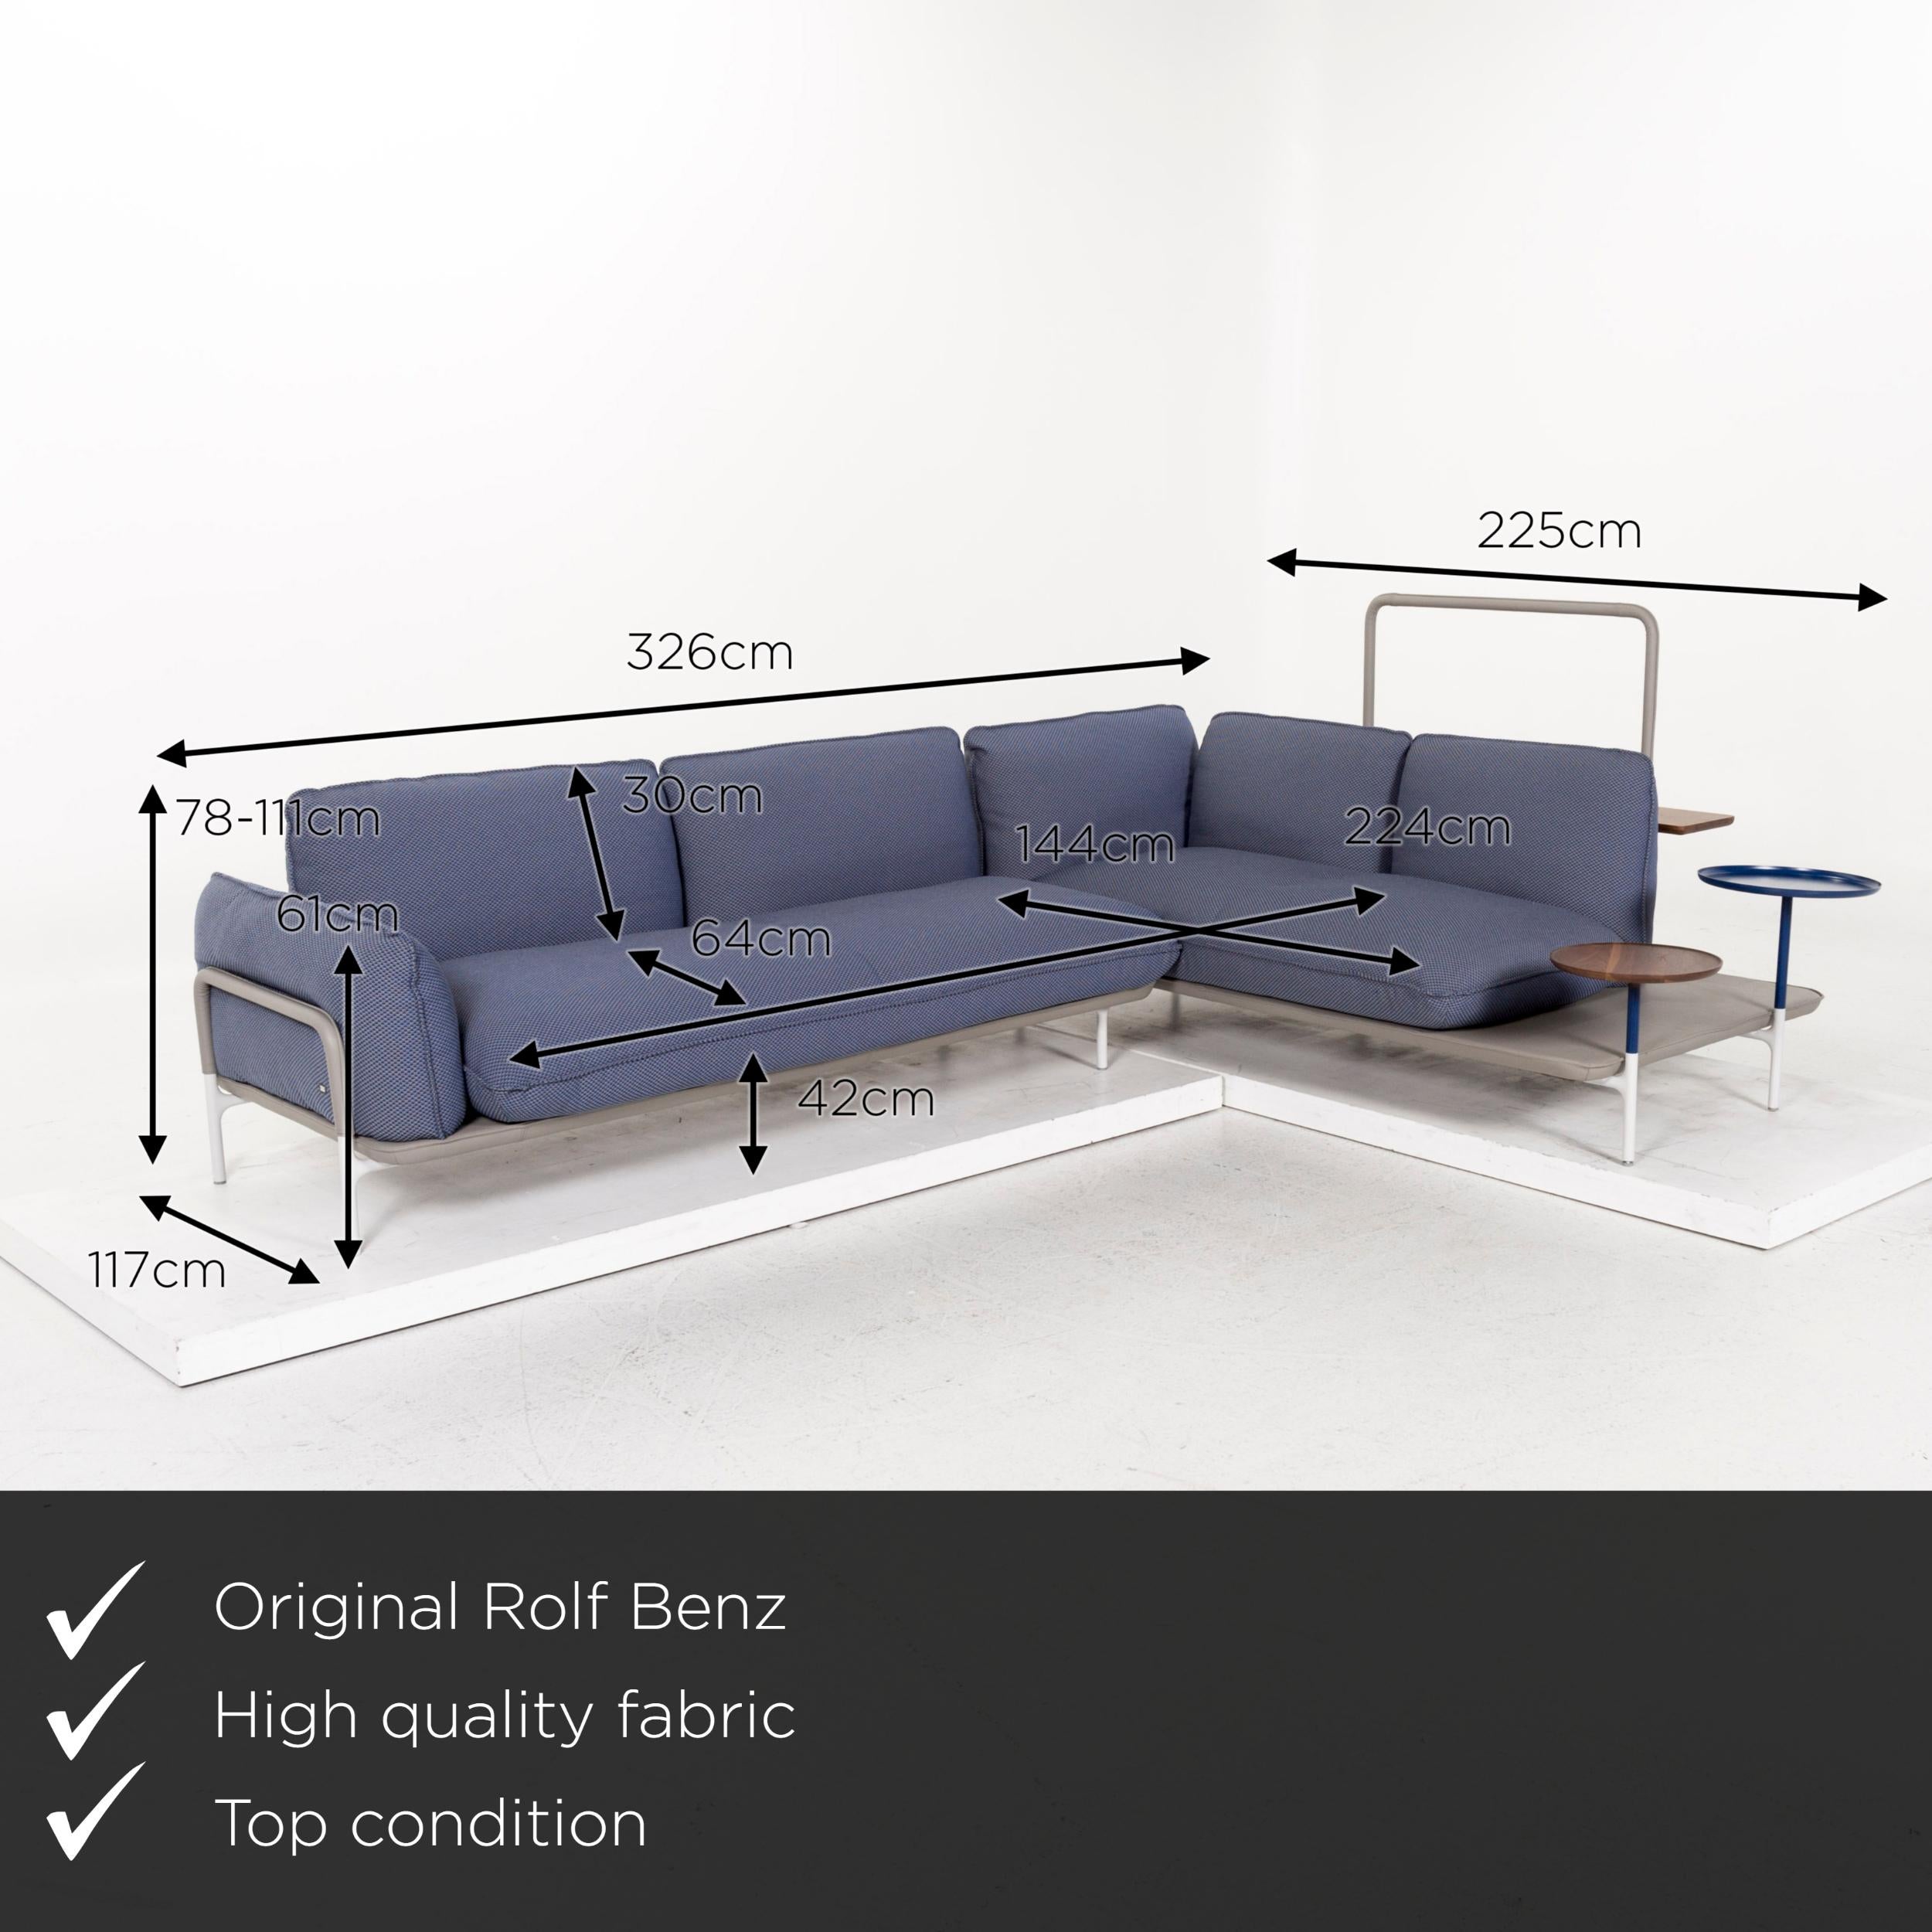 We present to you a Rolf Benz Addit fabric corner sofa blue shelf multifunctional function.
     
 

 Product measurements in centimeters:
 

Depth 117
Width 326
Height 78
Seat height 42
Rest height 61
Seat depth 64
Seat width 244
Back